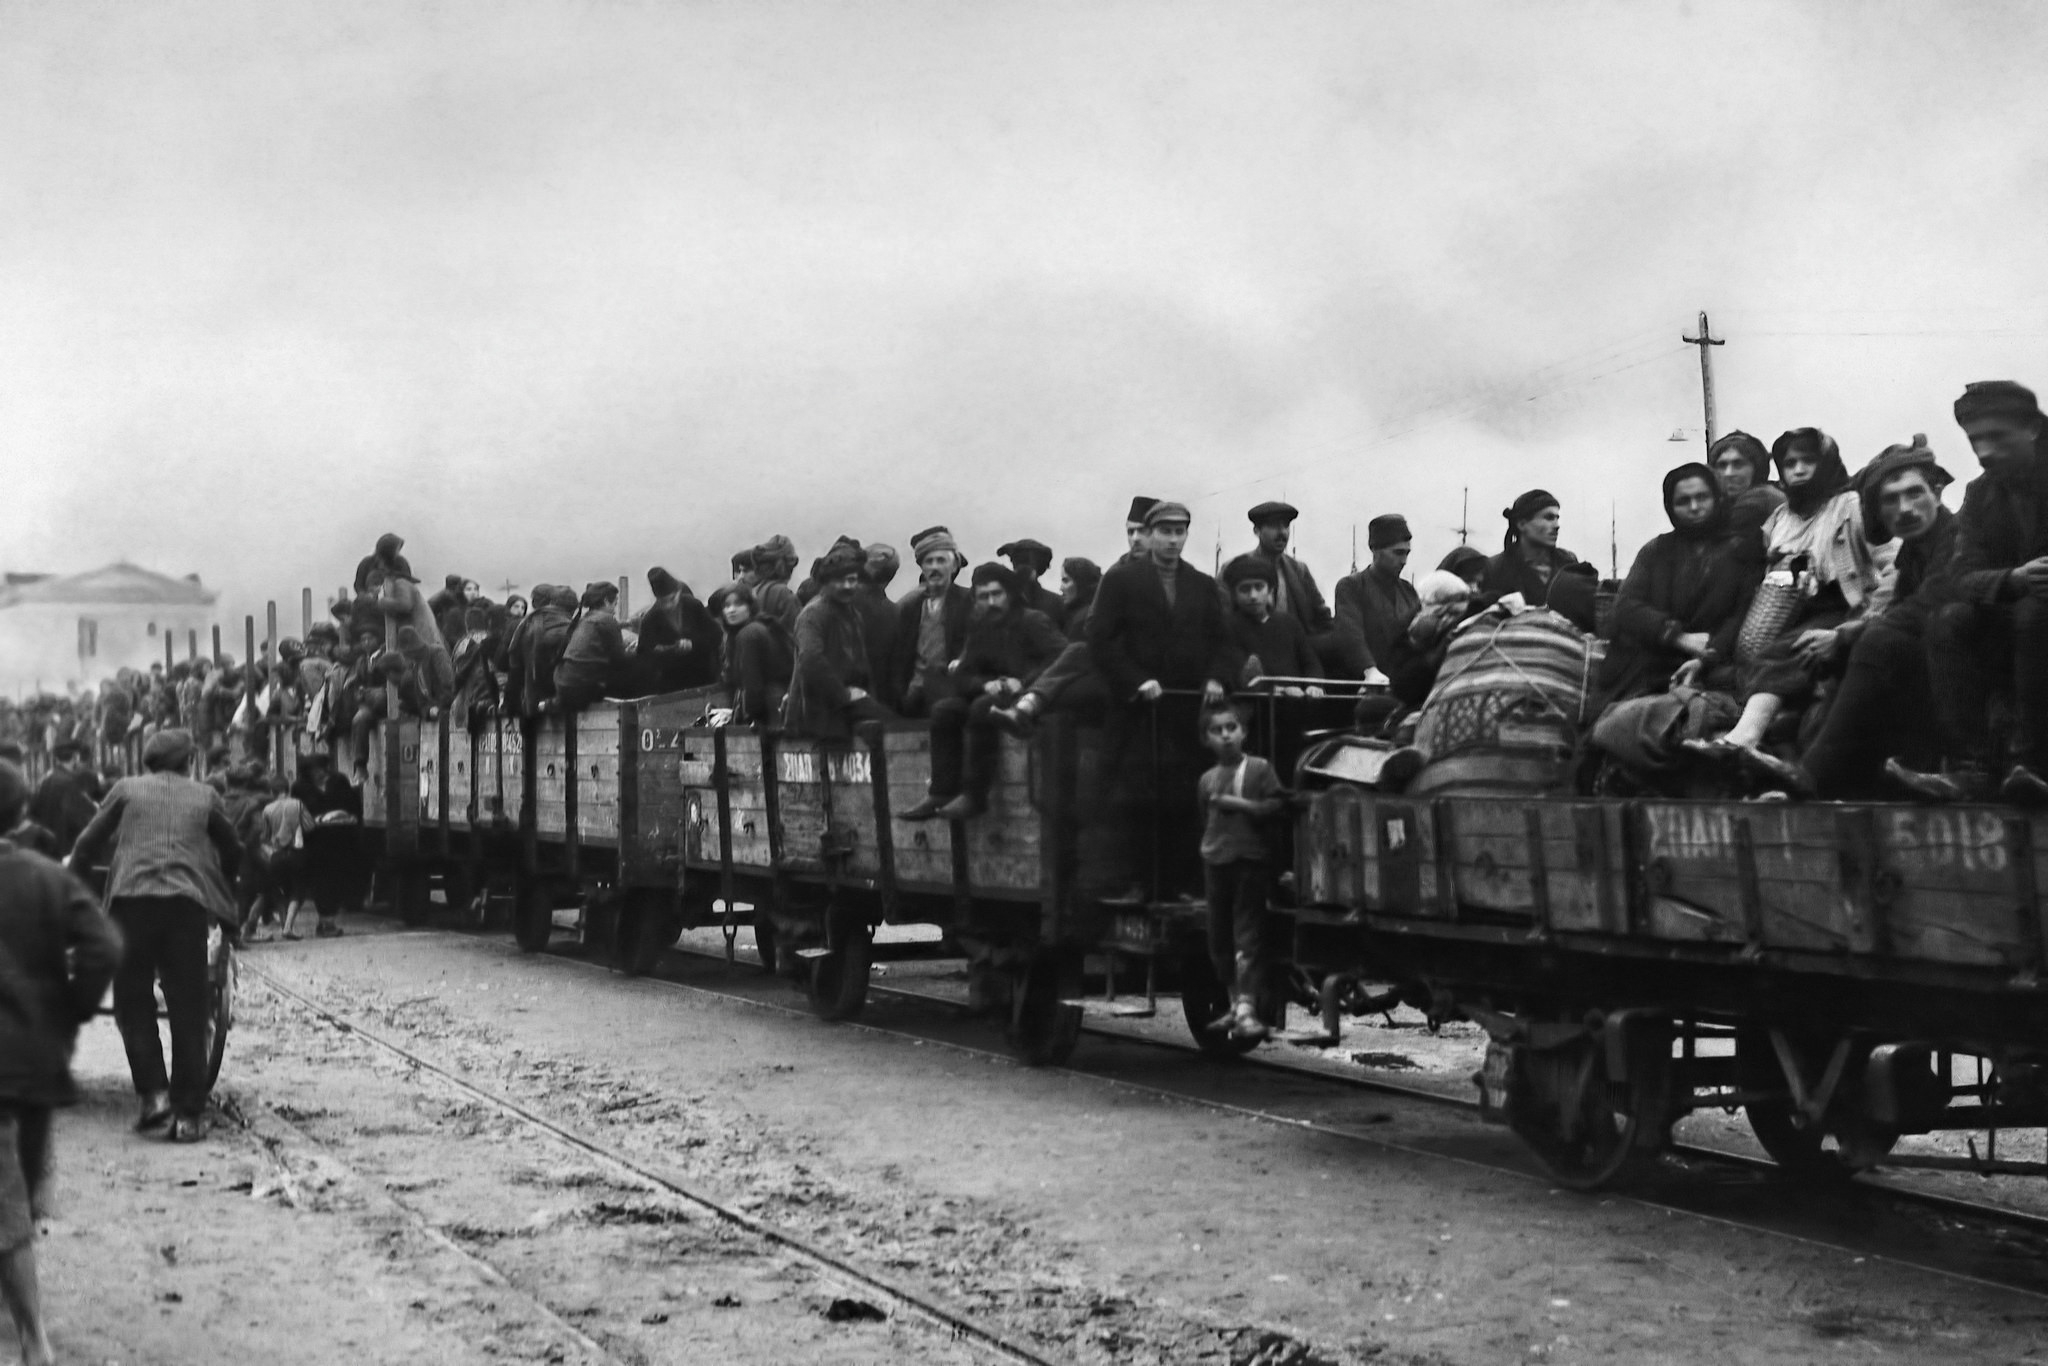 Greek Christian refugees from Turkey arriving in Greece 1922 Photographer C.D. Morris Courtesy American Red Cross Library of Congress